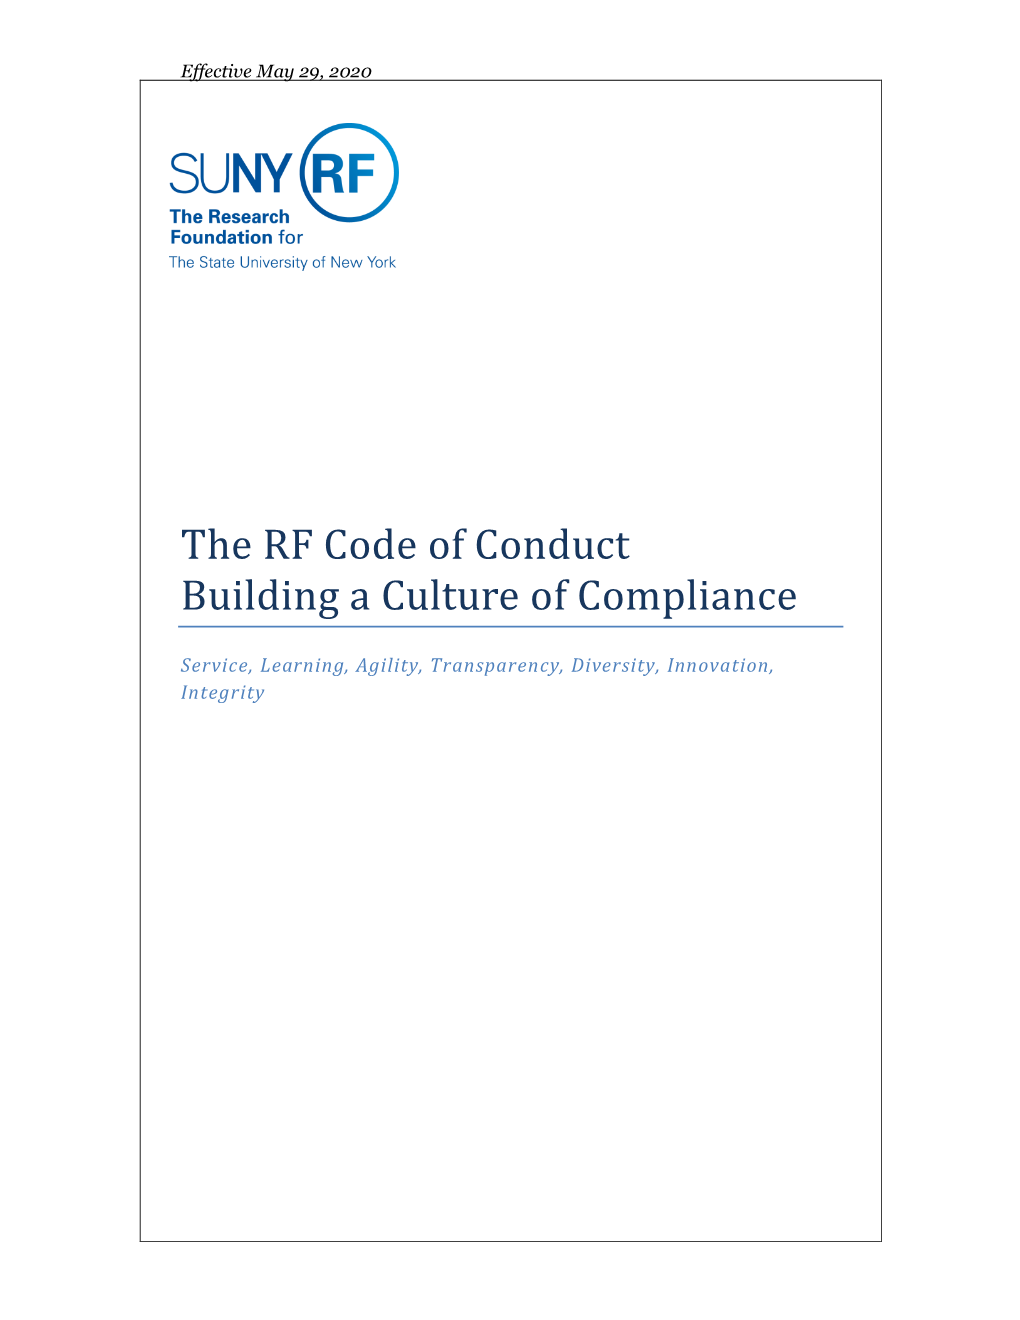 Code of Conduct Building a Culture of Compliance